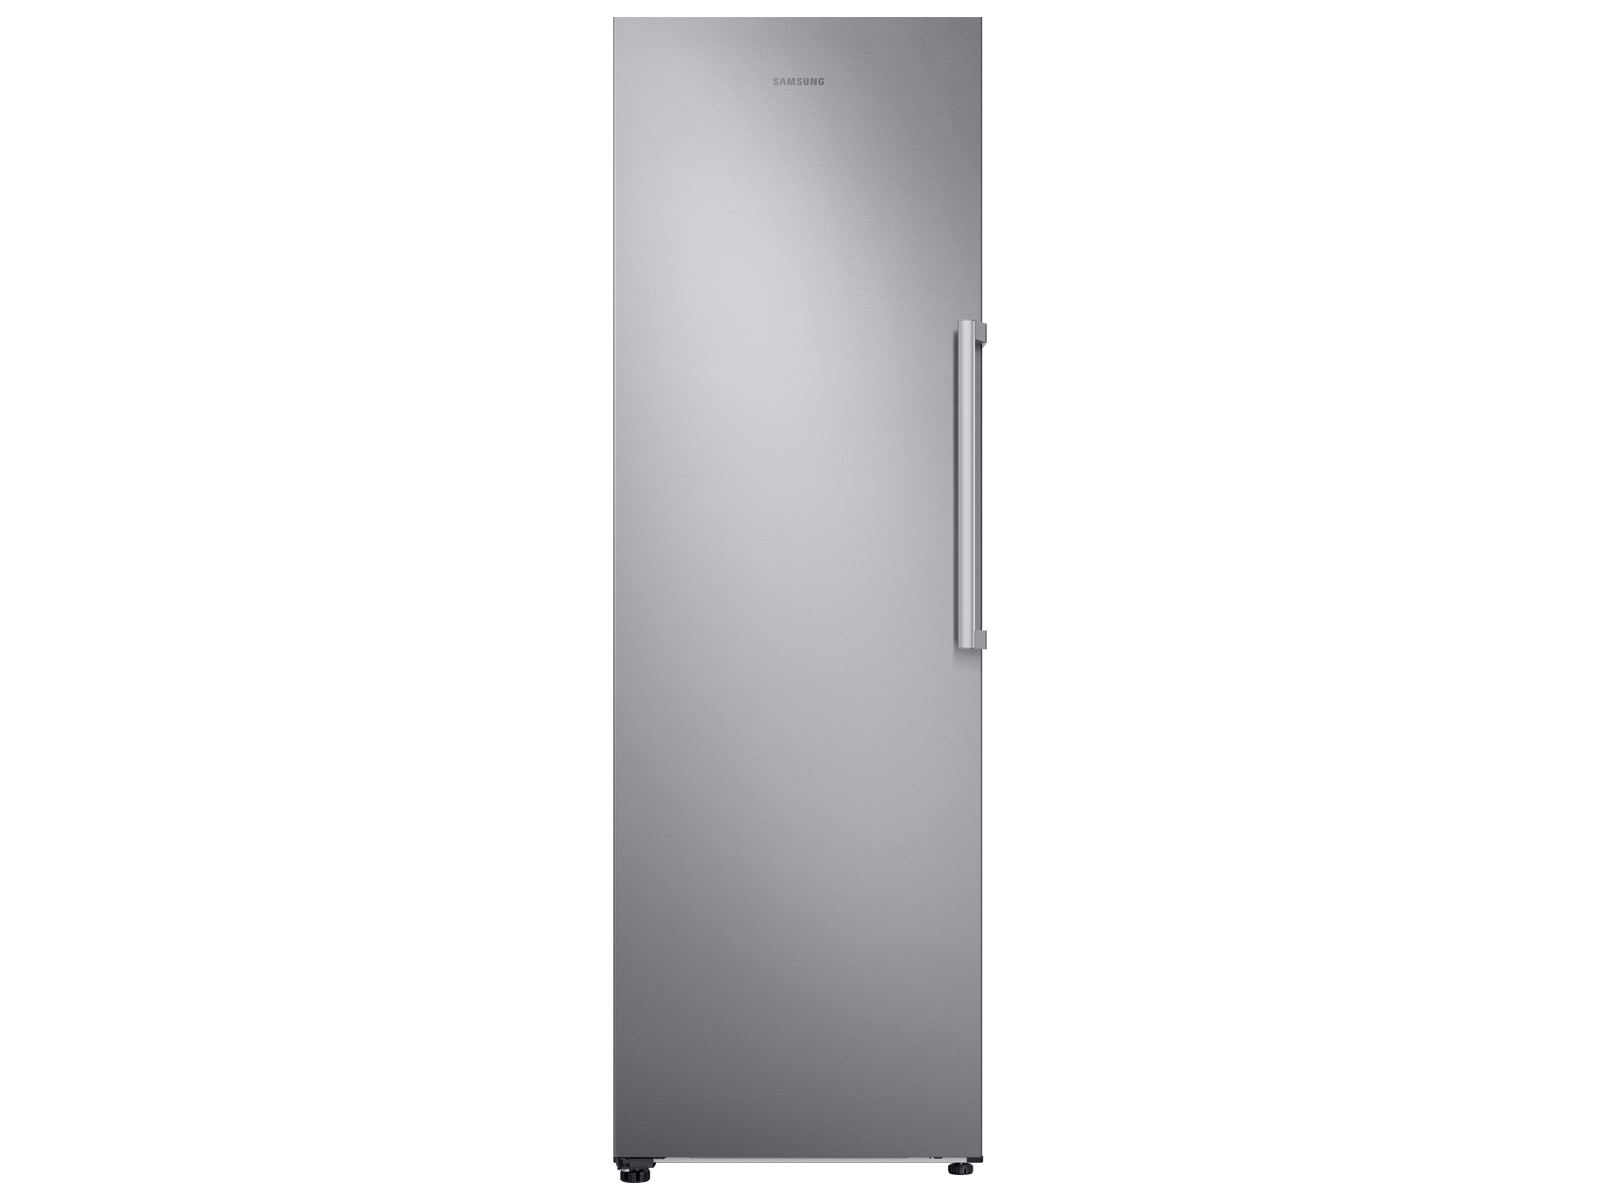 Samsung 11.4 cu. ft. Capacity Convertible Upright Freezer in Stainless Look(RZ11M7074SA/AA)